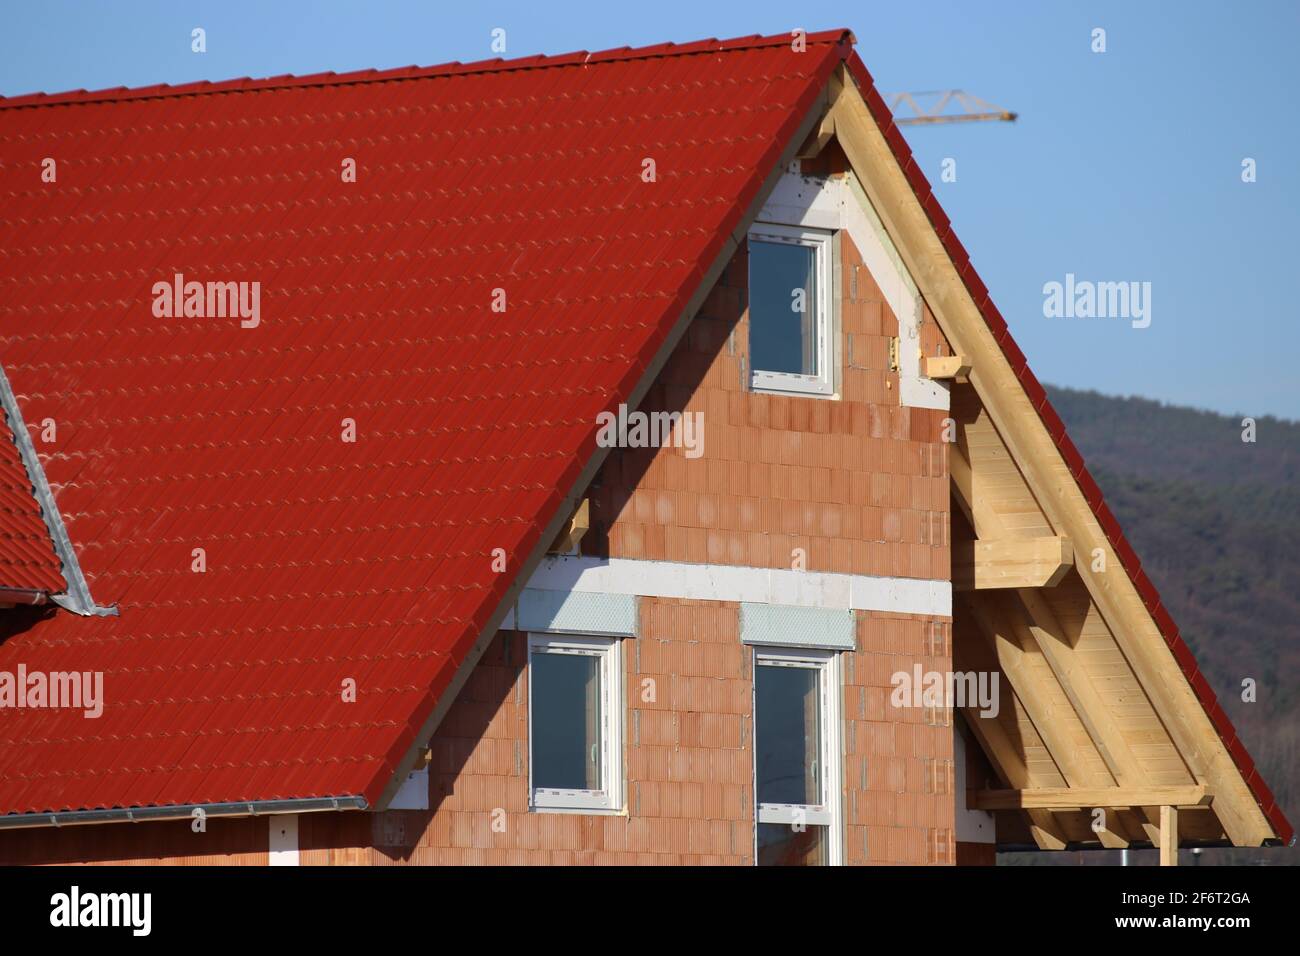 New tile roof on a residential house. Stock Photo